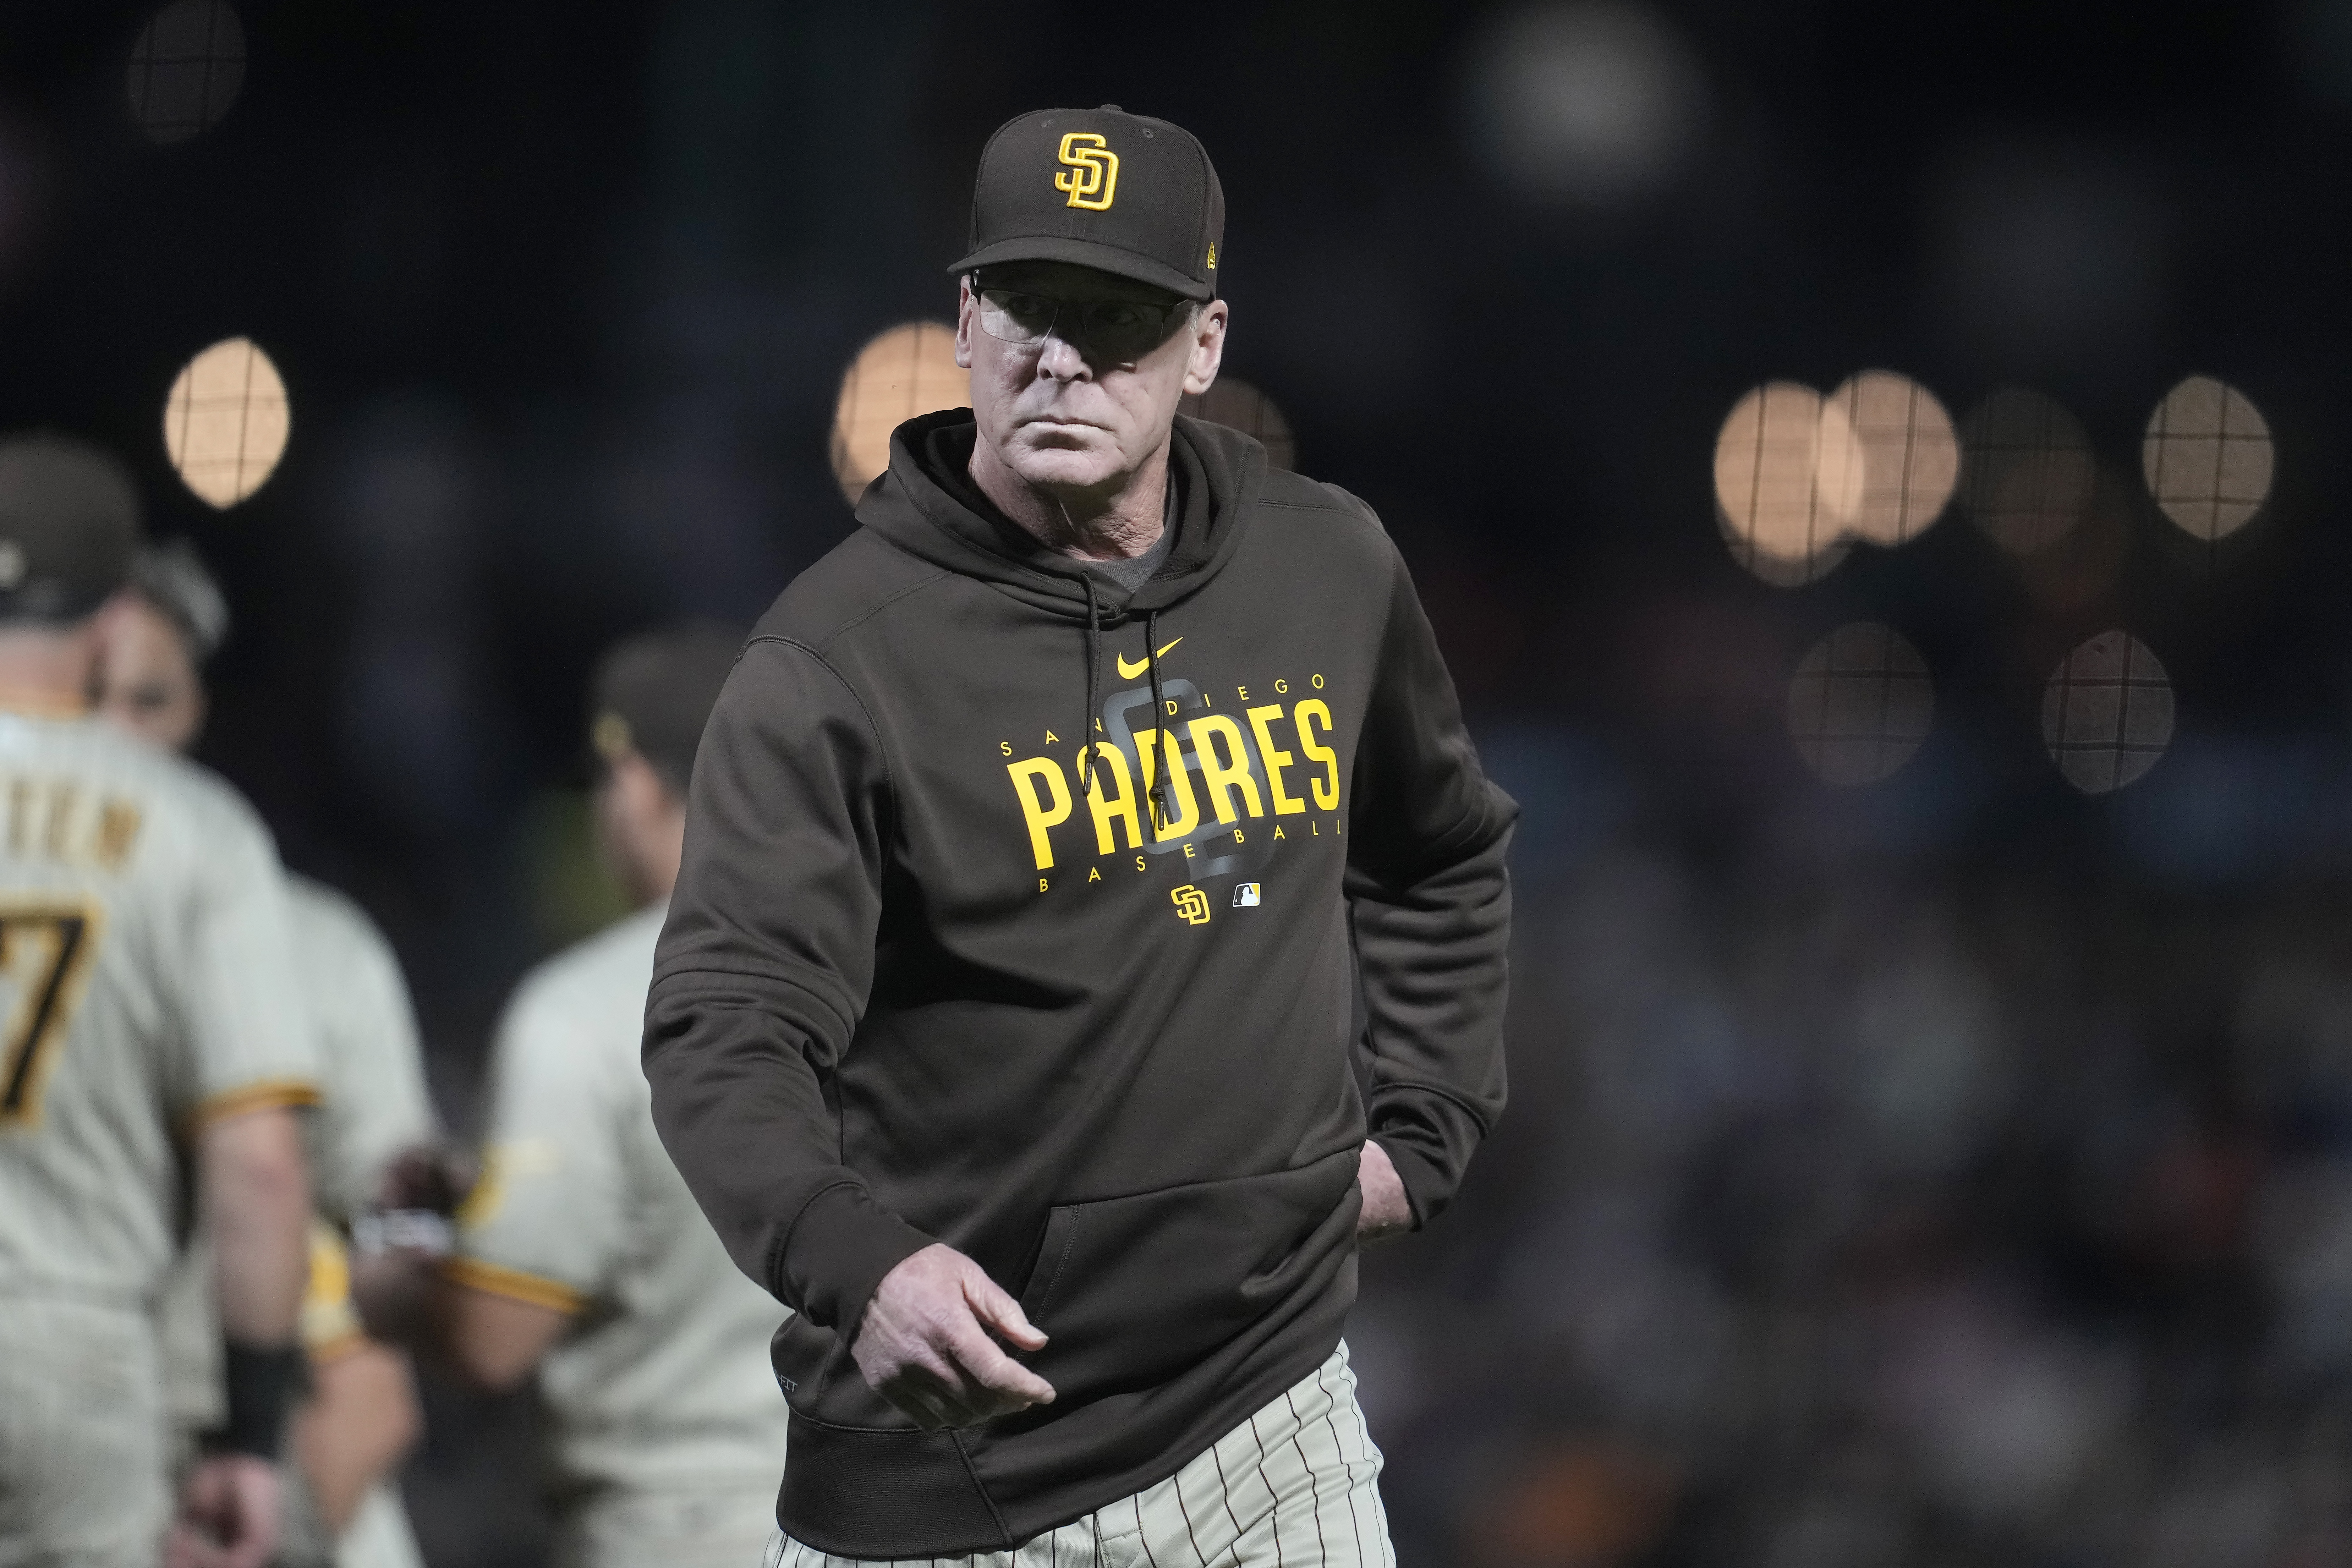 Padres expect to bring back old uniform colors starting in 2020